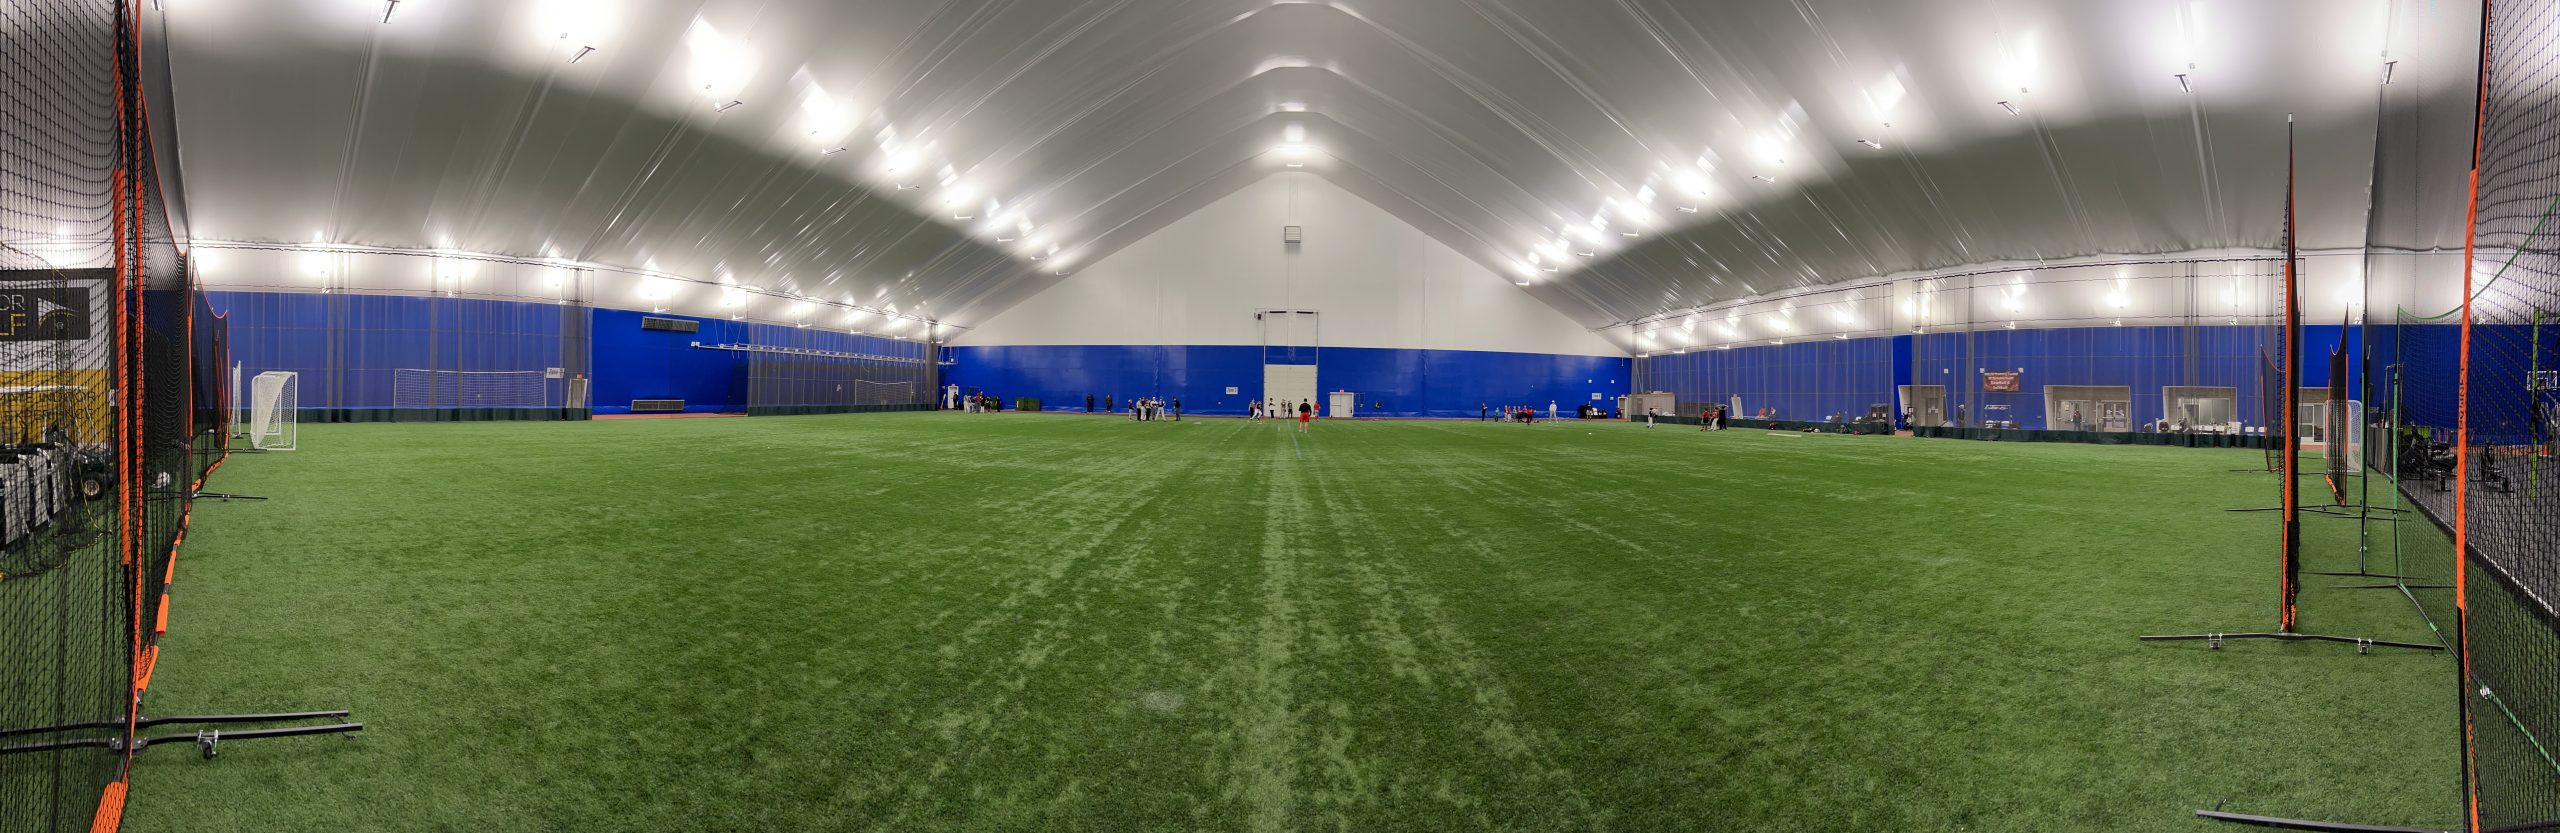 Interior of Go For It Sports Dome